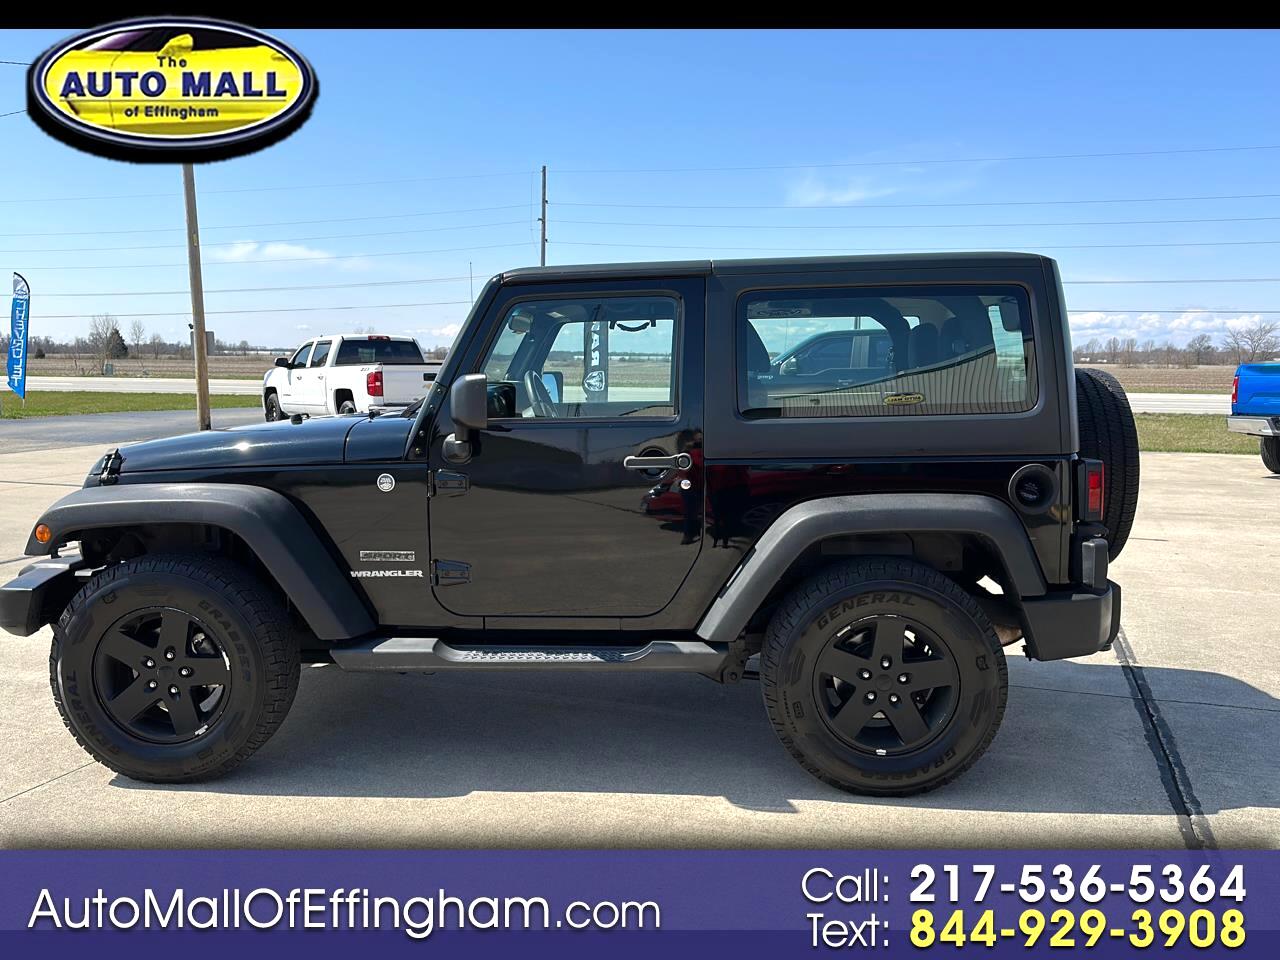 Used 2011 Jeep Wrangler 4WD 2dr Sport for Sale in Effingham IL 62401 The  Automall of Effingham